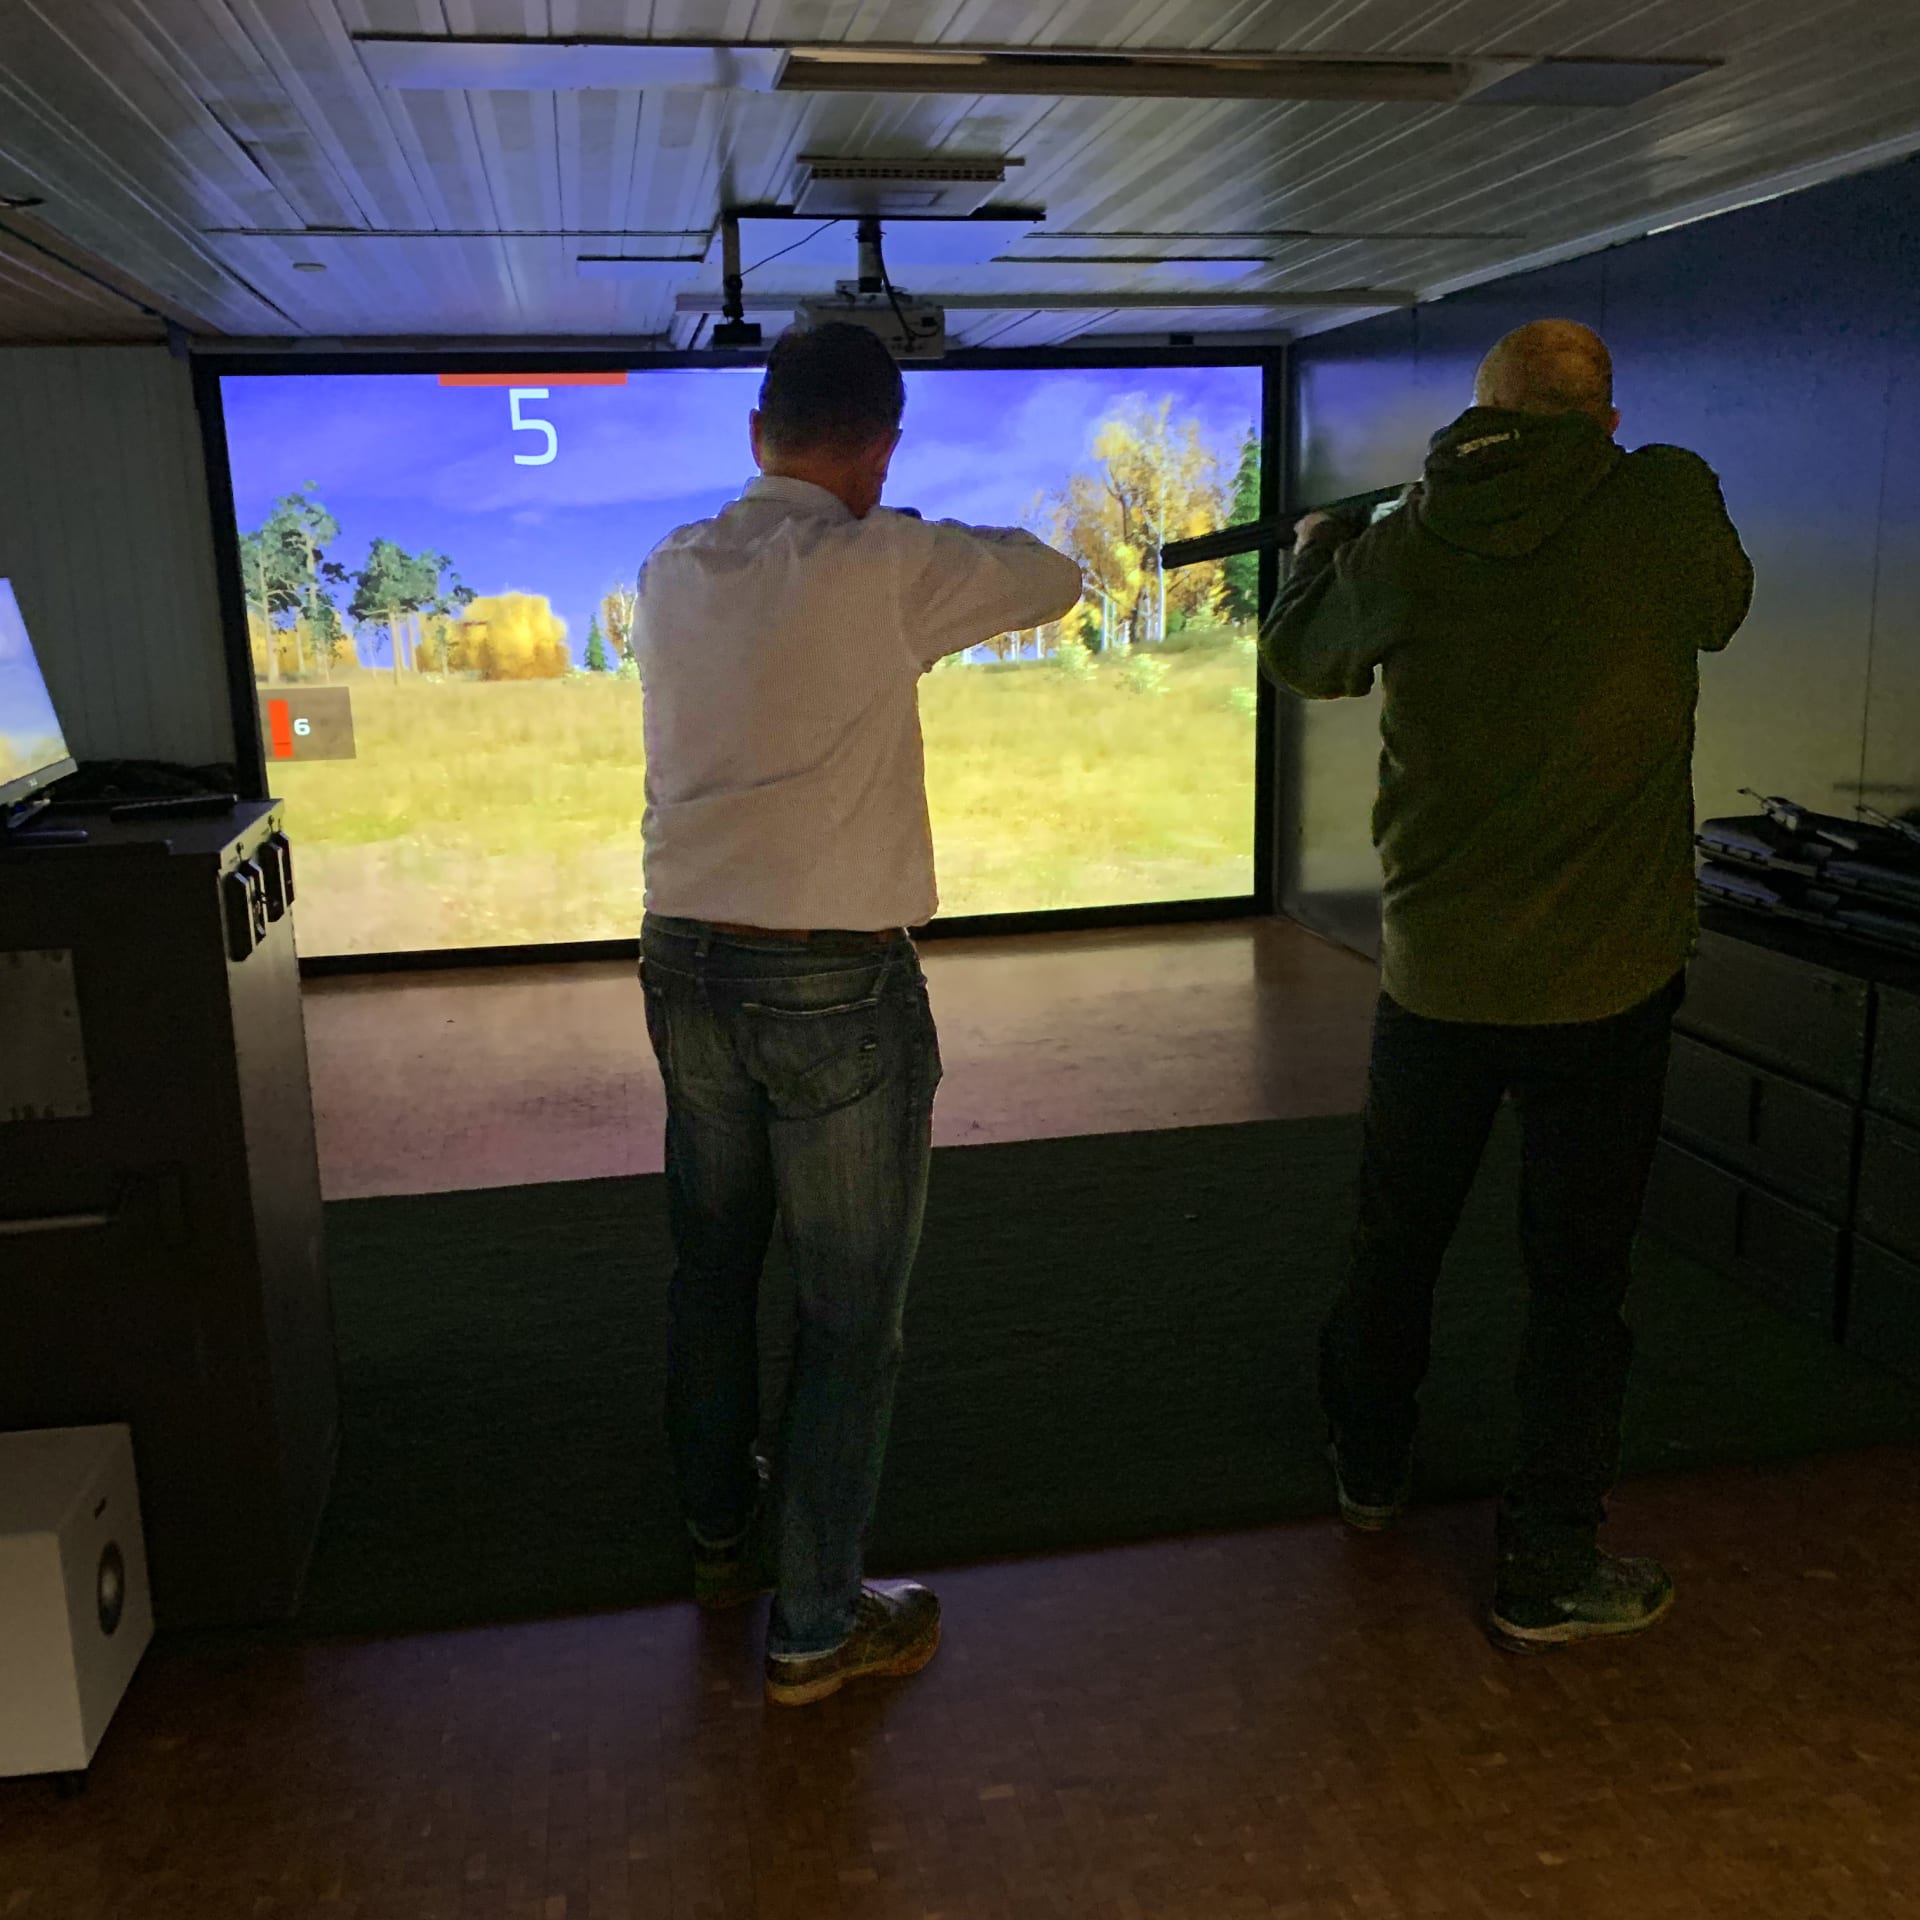 With the simulator, you can practice different hunting situations and precision shooting.